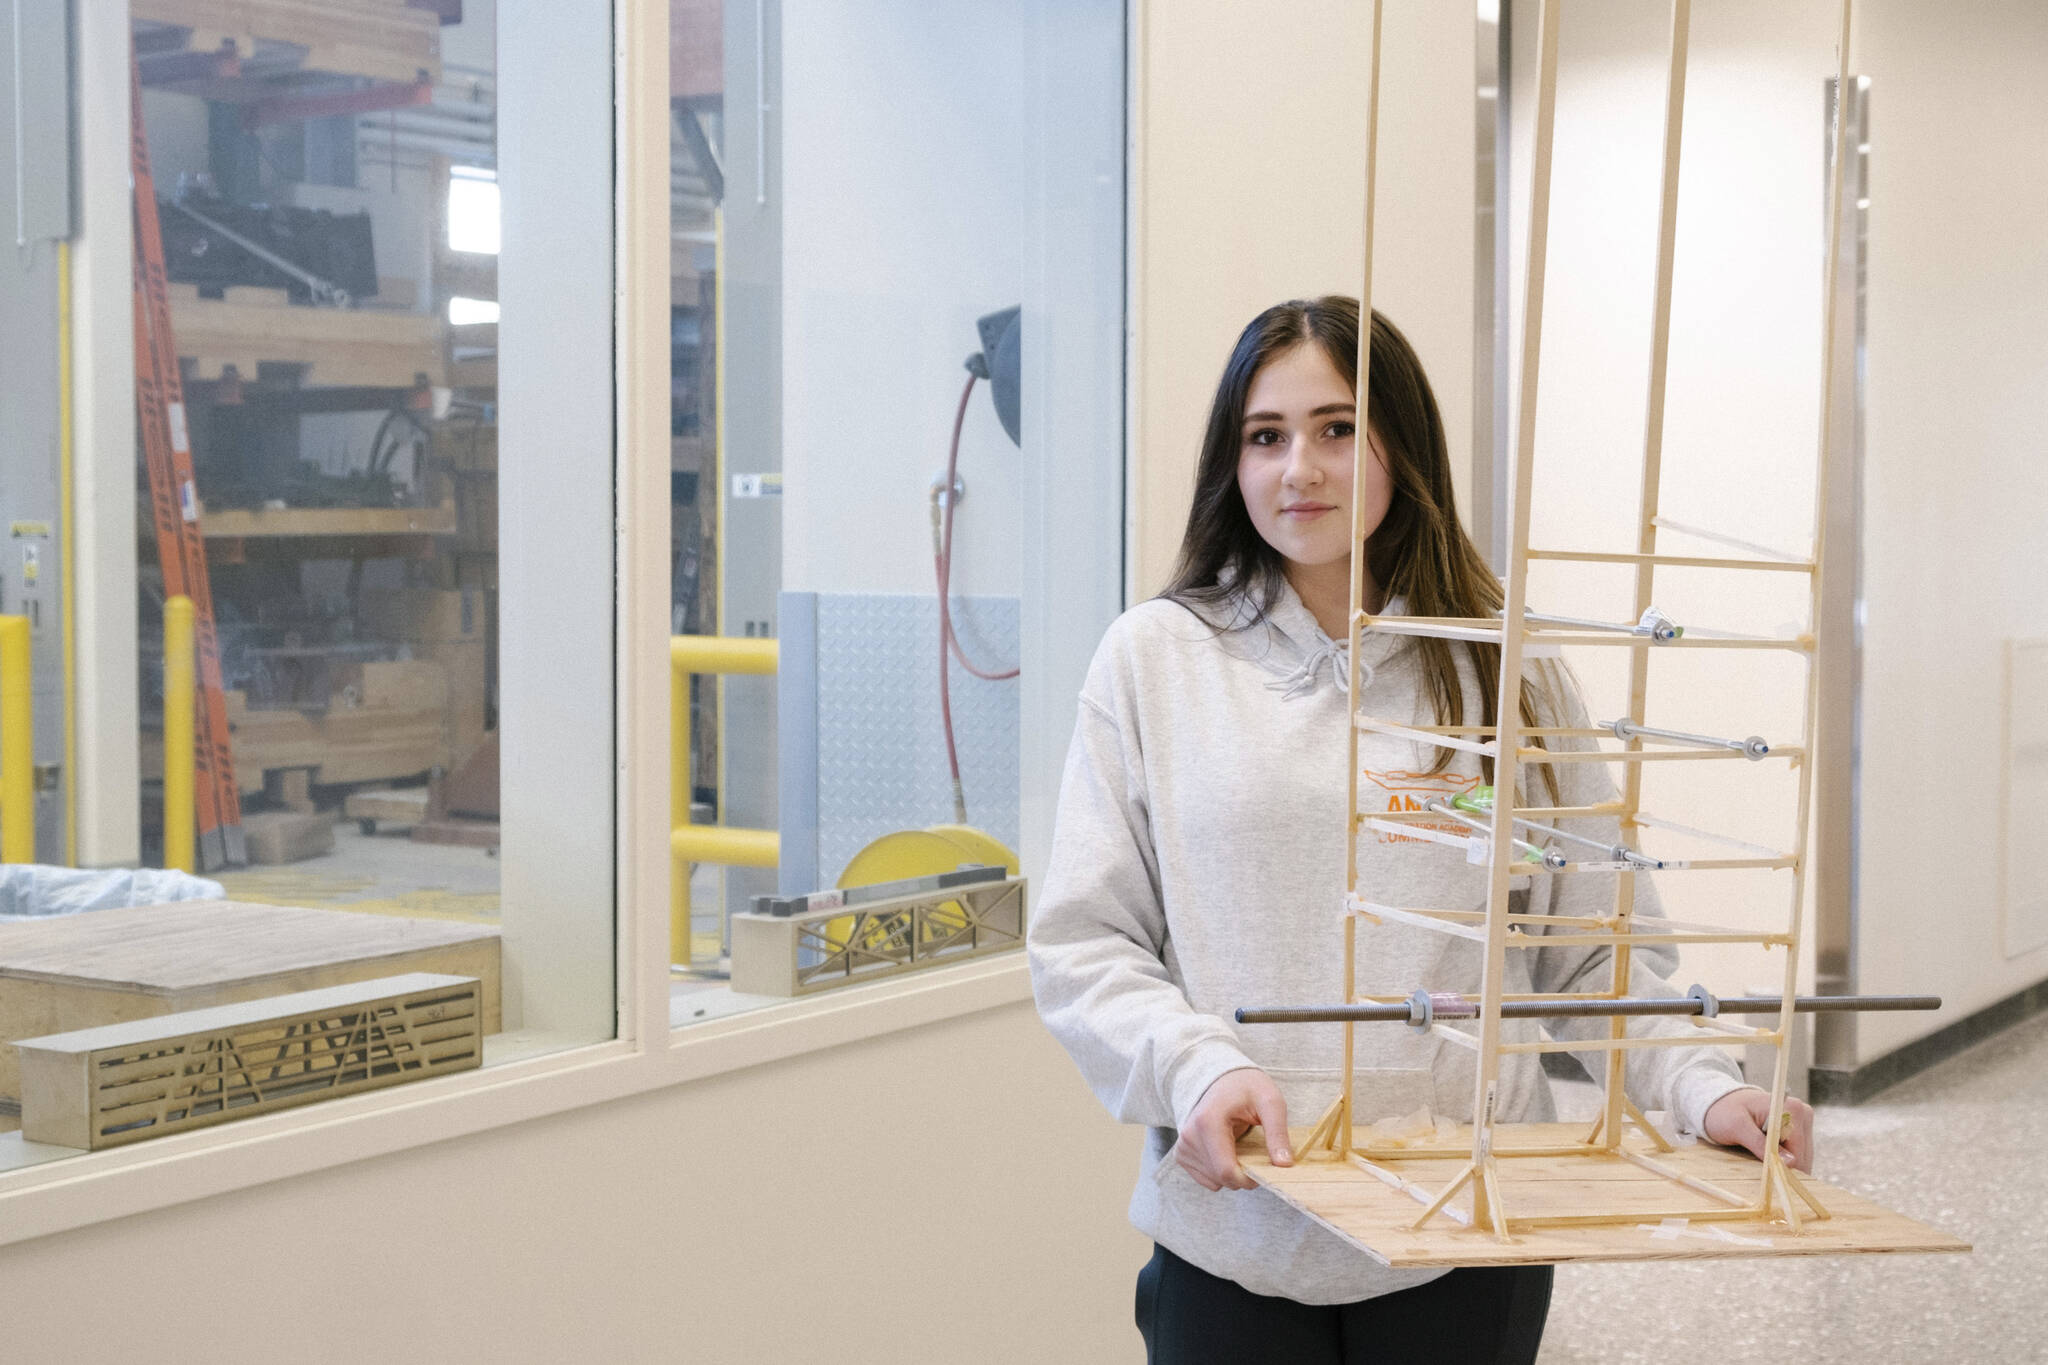 ANSEP Acceleration Academy (Summer) student Alivia Fefelov poses on Tuesday, June 21, at the University of Alaska Anchorage with a balsa tower she helped build to learn about engineering structures to survive earthquakes. The tower withstood a simulated earthquake. (Photo provided)